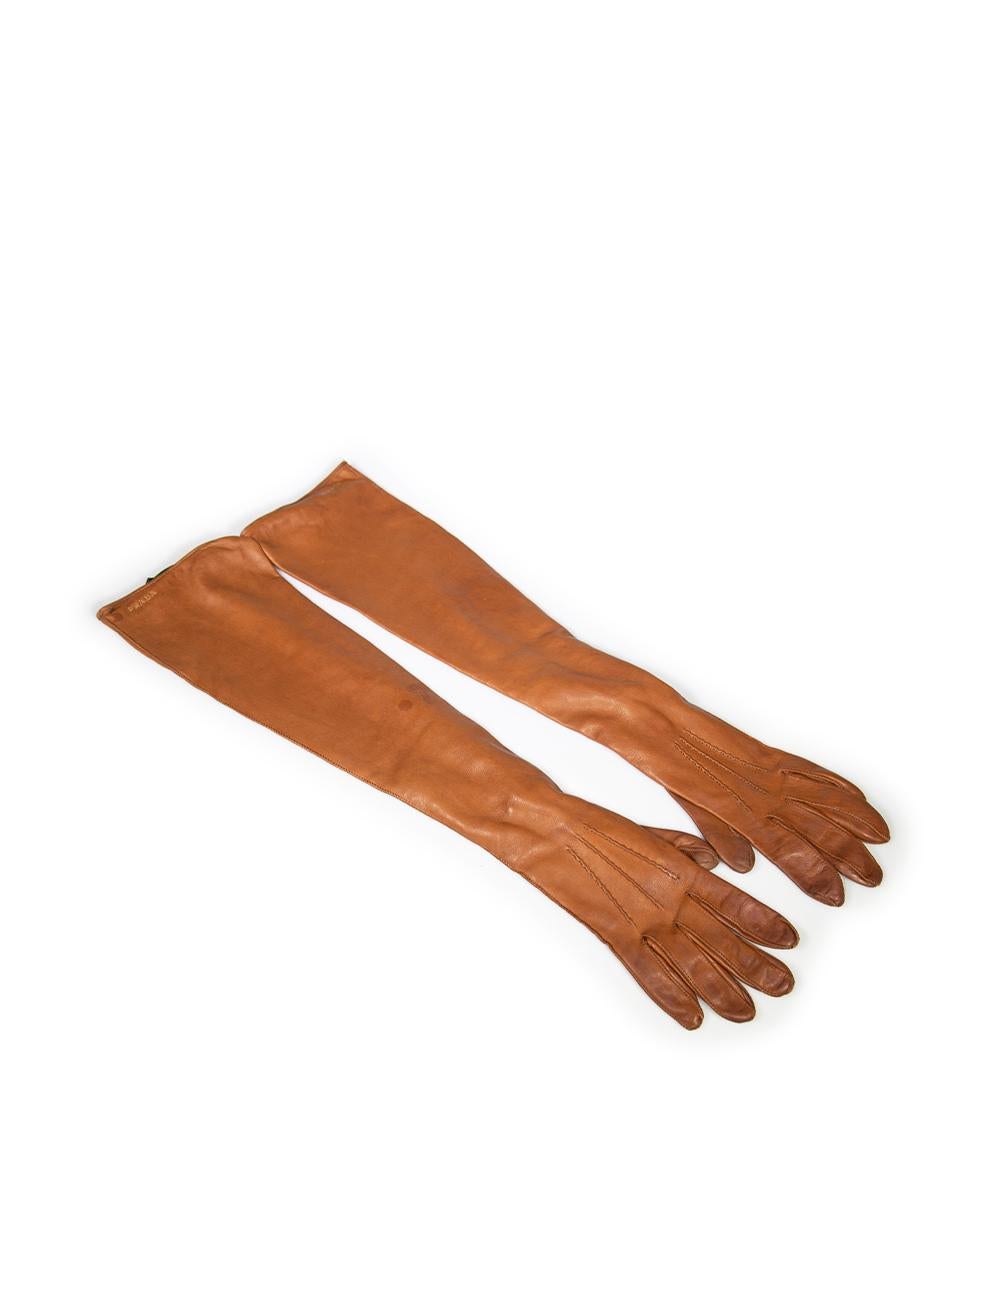 CONDITION is Good. General wear to gloves is evident. Moderate signs of wear to exterior with mild creasing, abrasion and discolouration found on the finger pads on this used Prada designer resale item.
 
 
 
 Details
 
 
 Brown
 
 Leather
 
